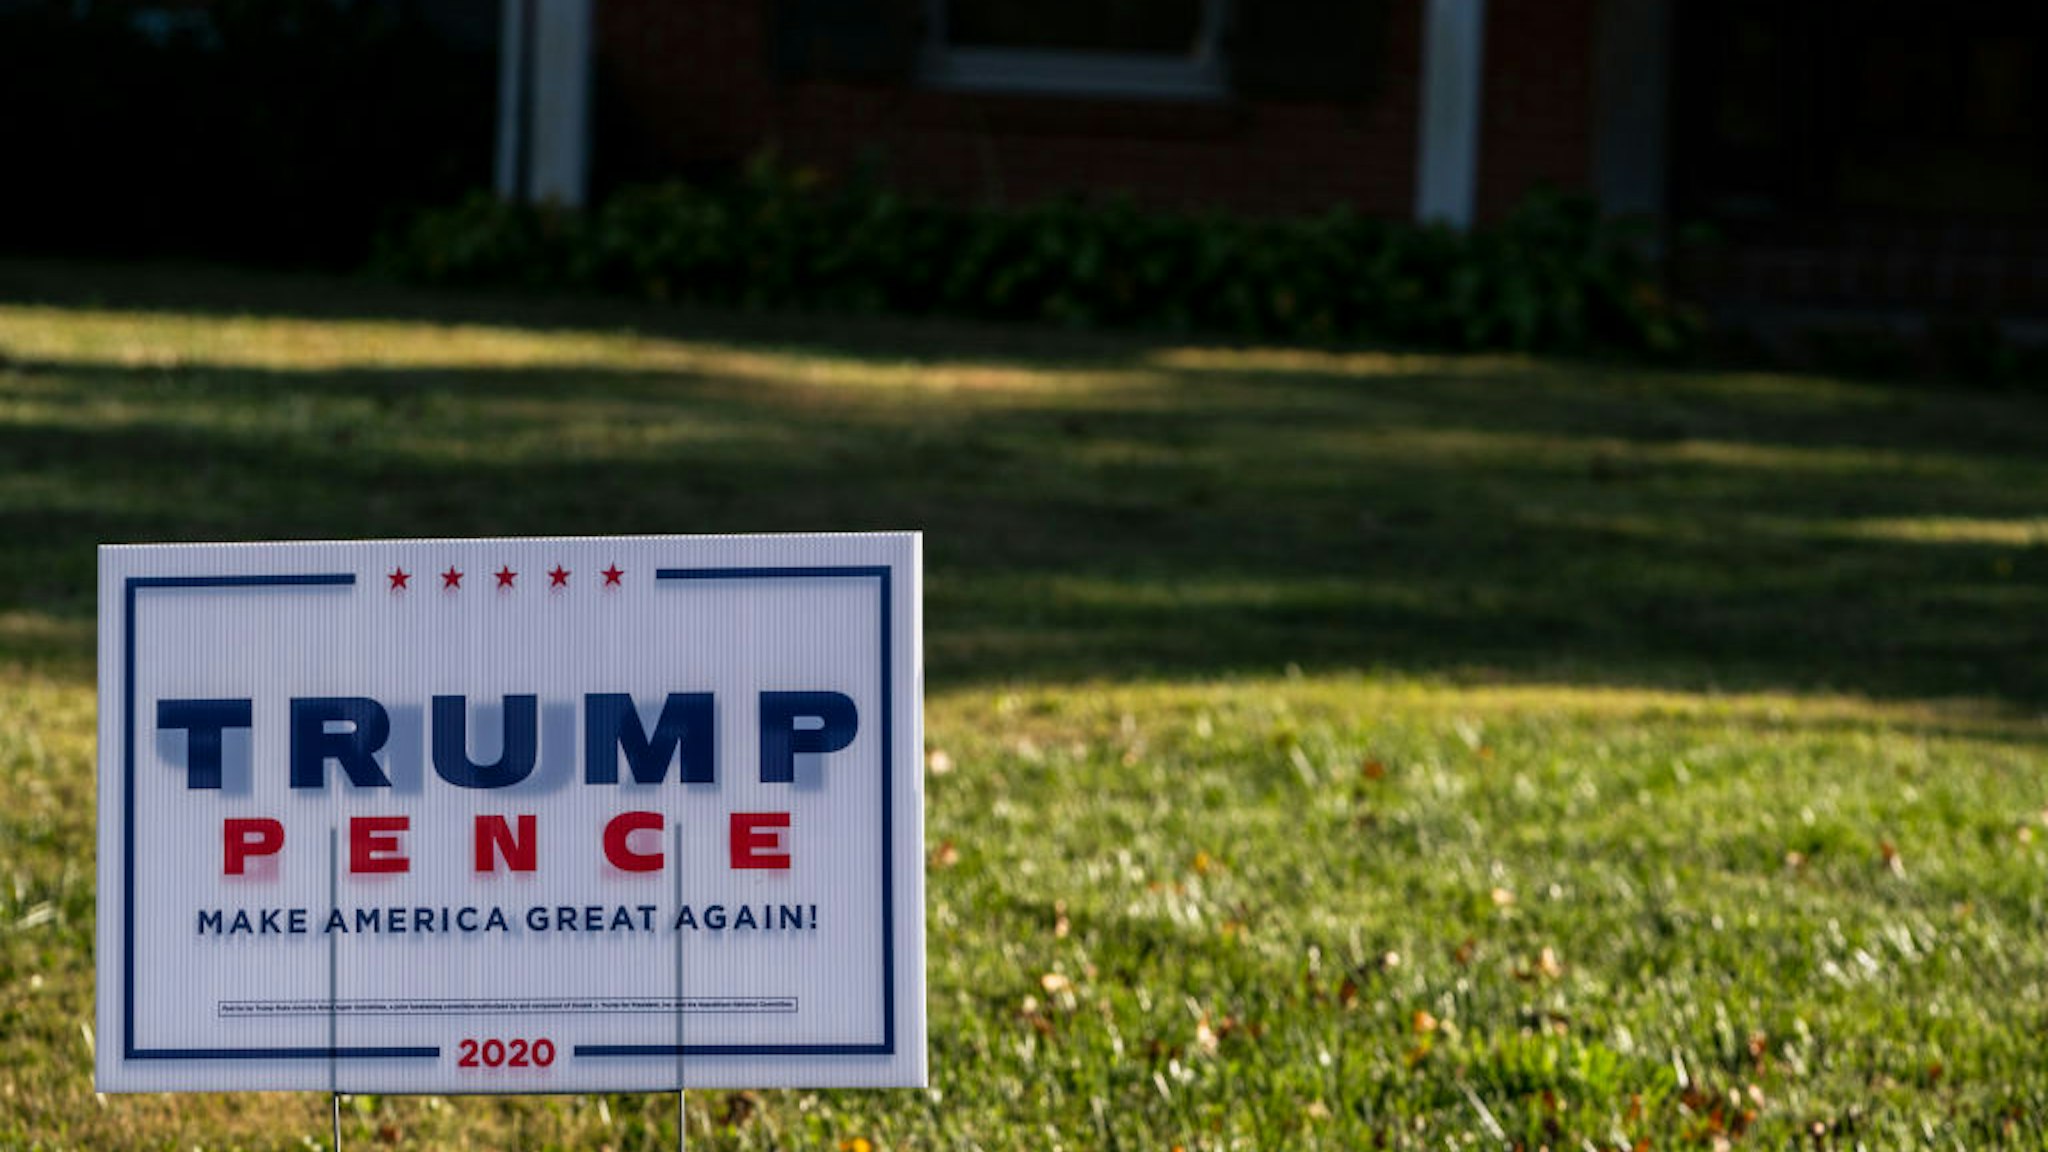 A Trump/Pence yard sign is seen on October 13, 2020 in Louisville, Kentucky.